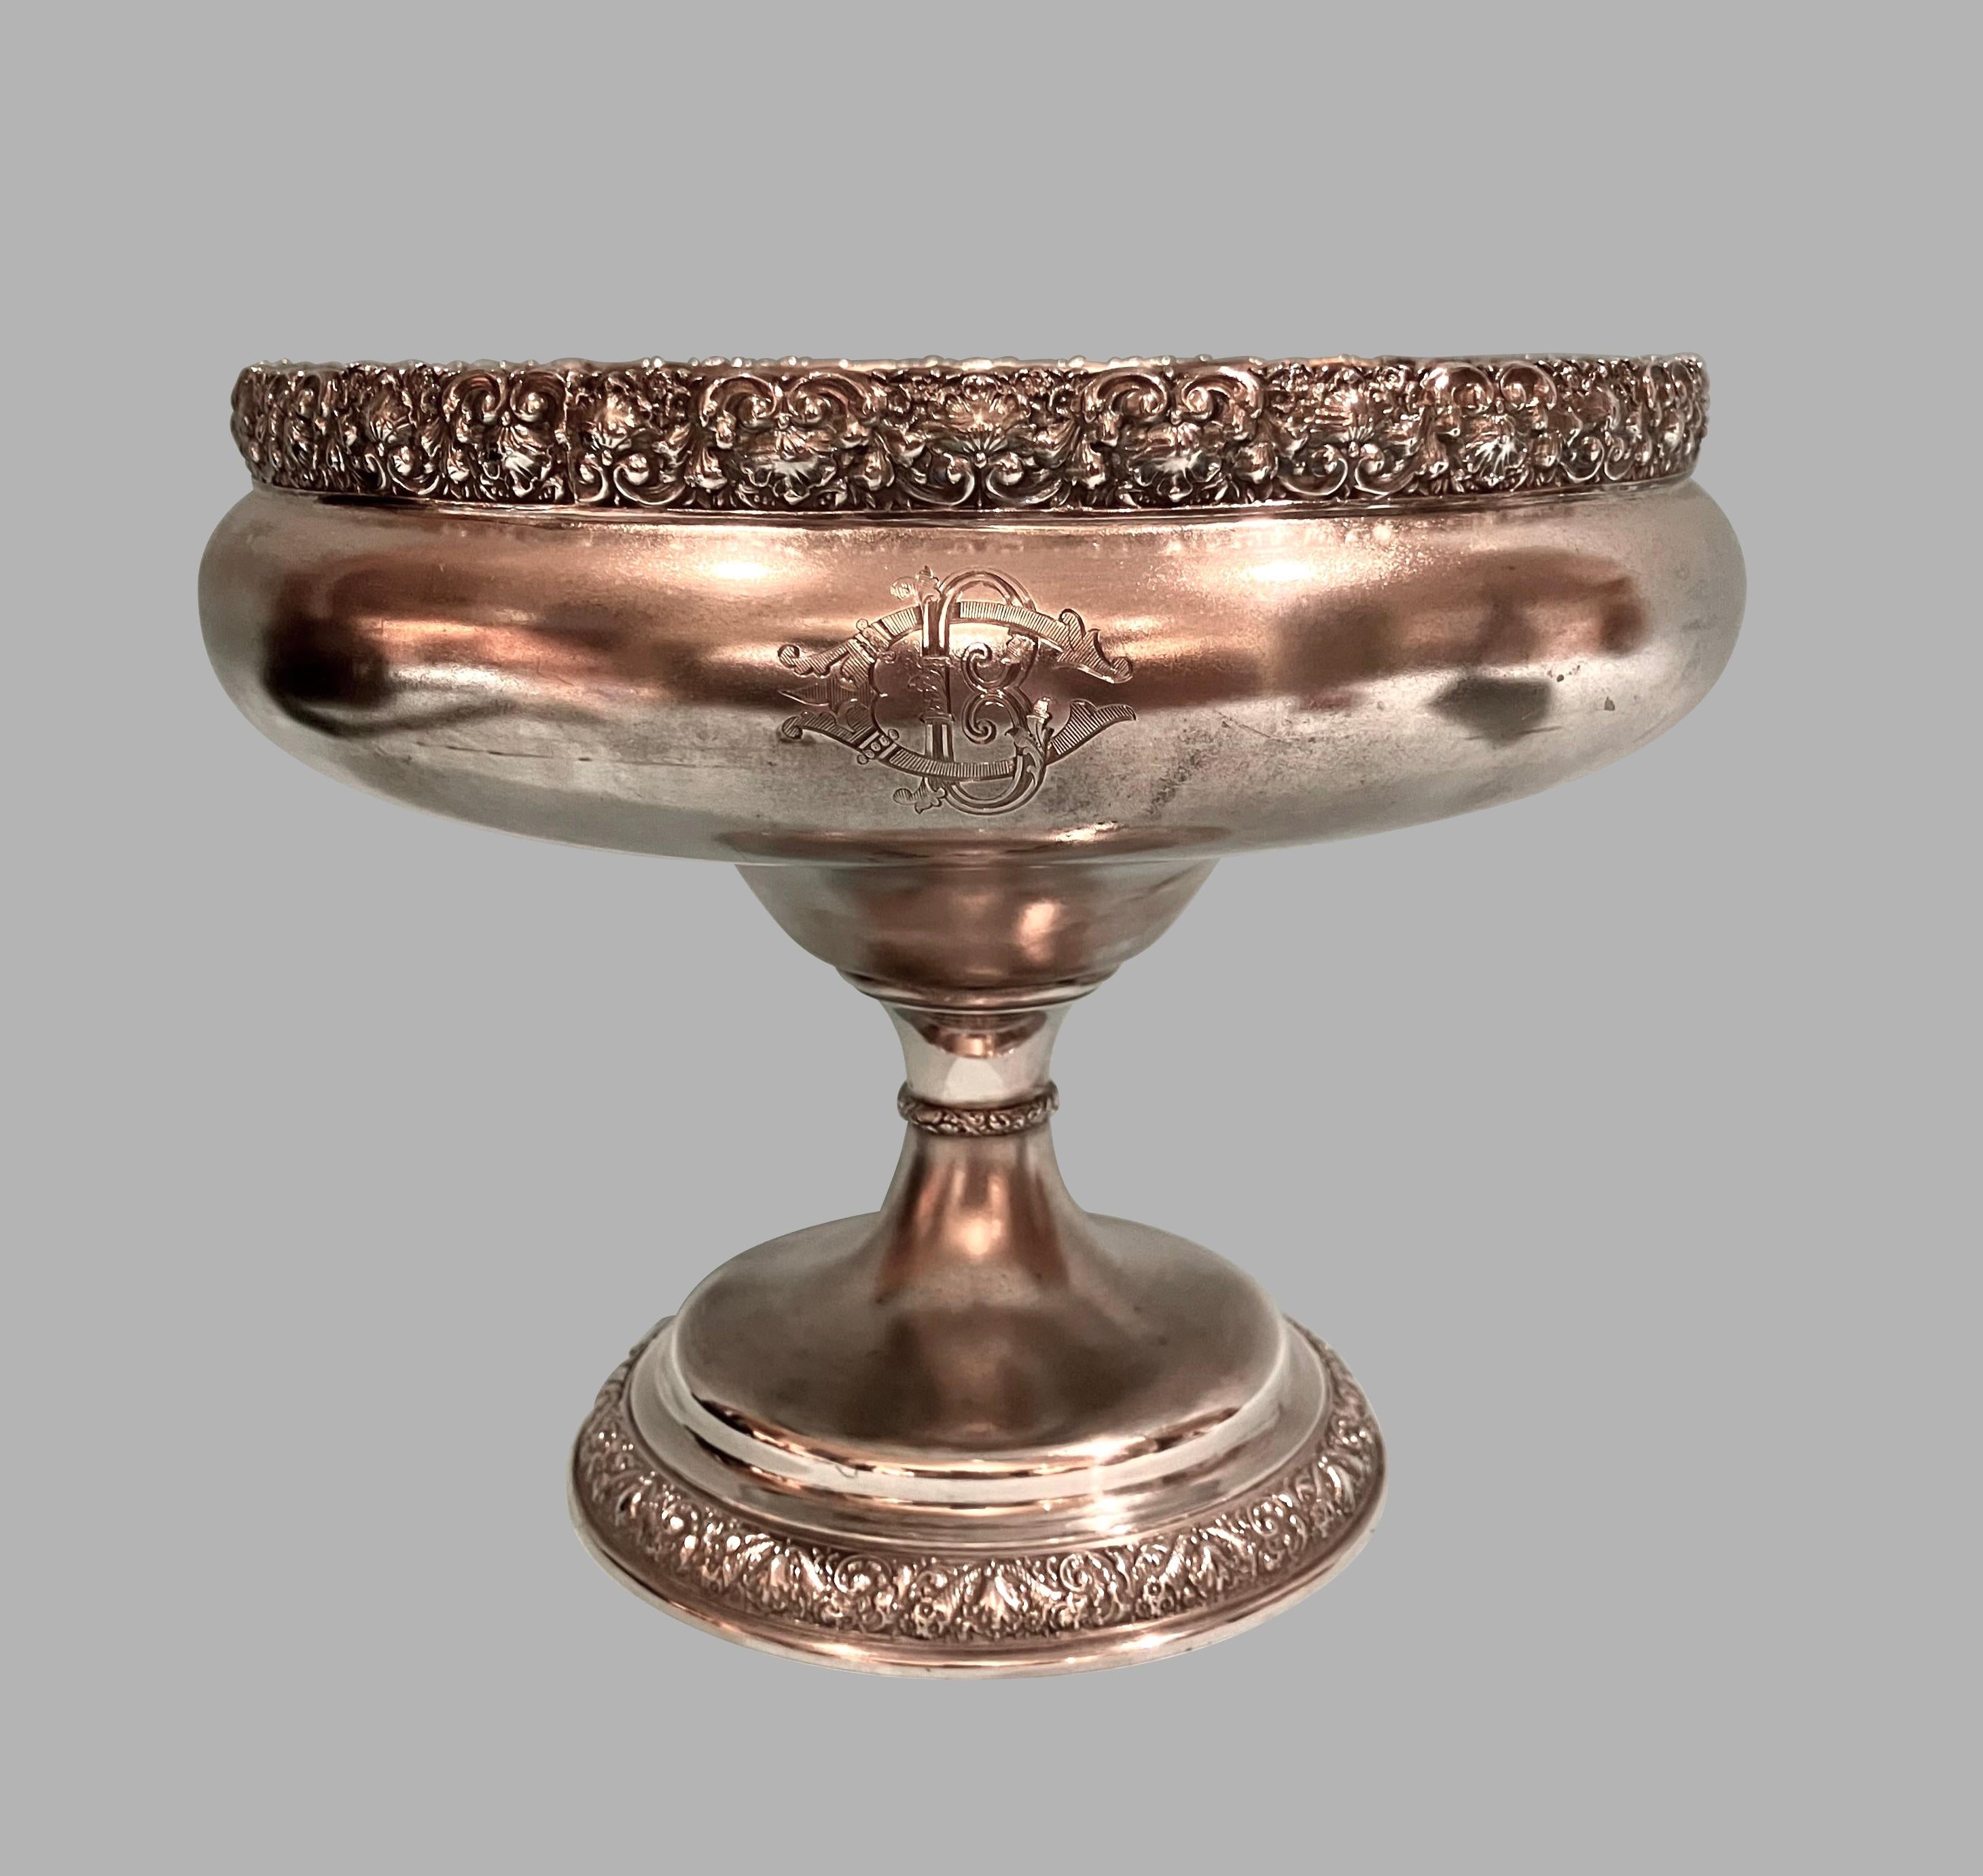 A Tiffany & Company gilt-washed sterling silver center bowl of baluster form stamped on the underside 